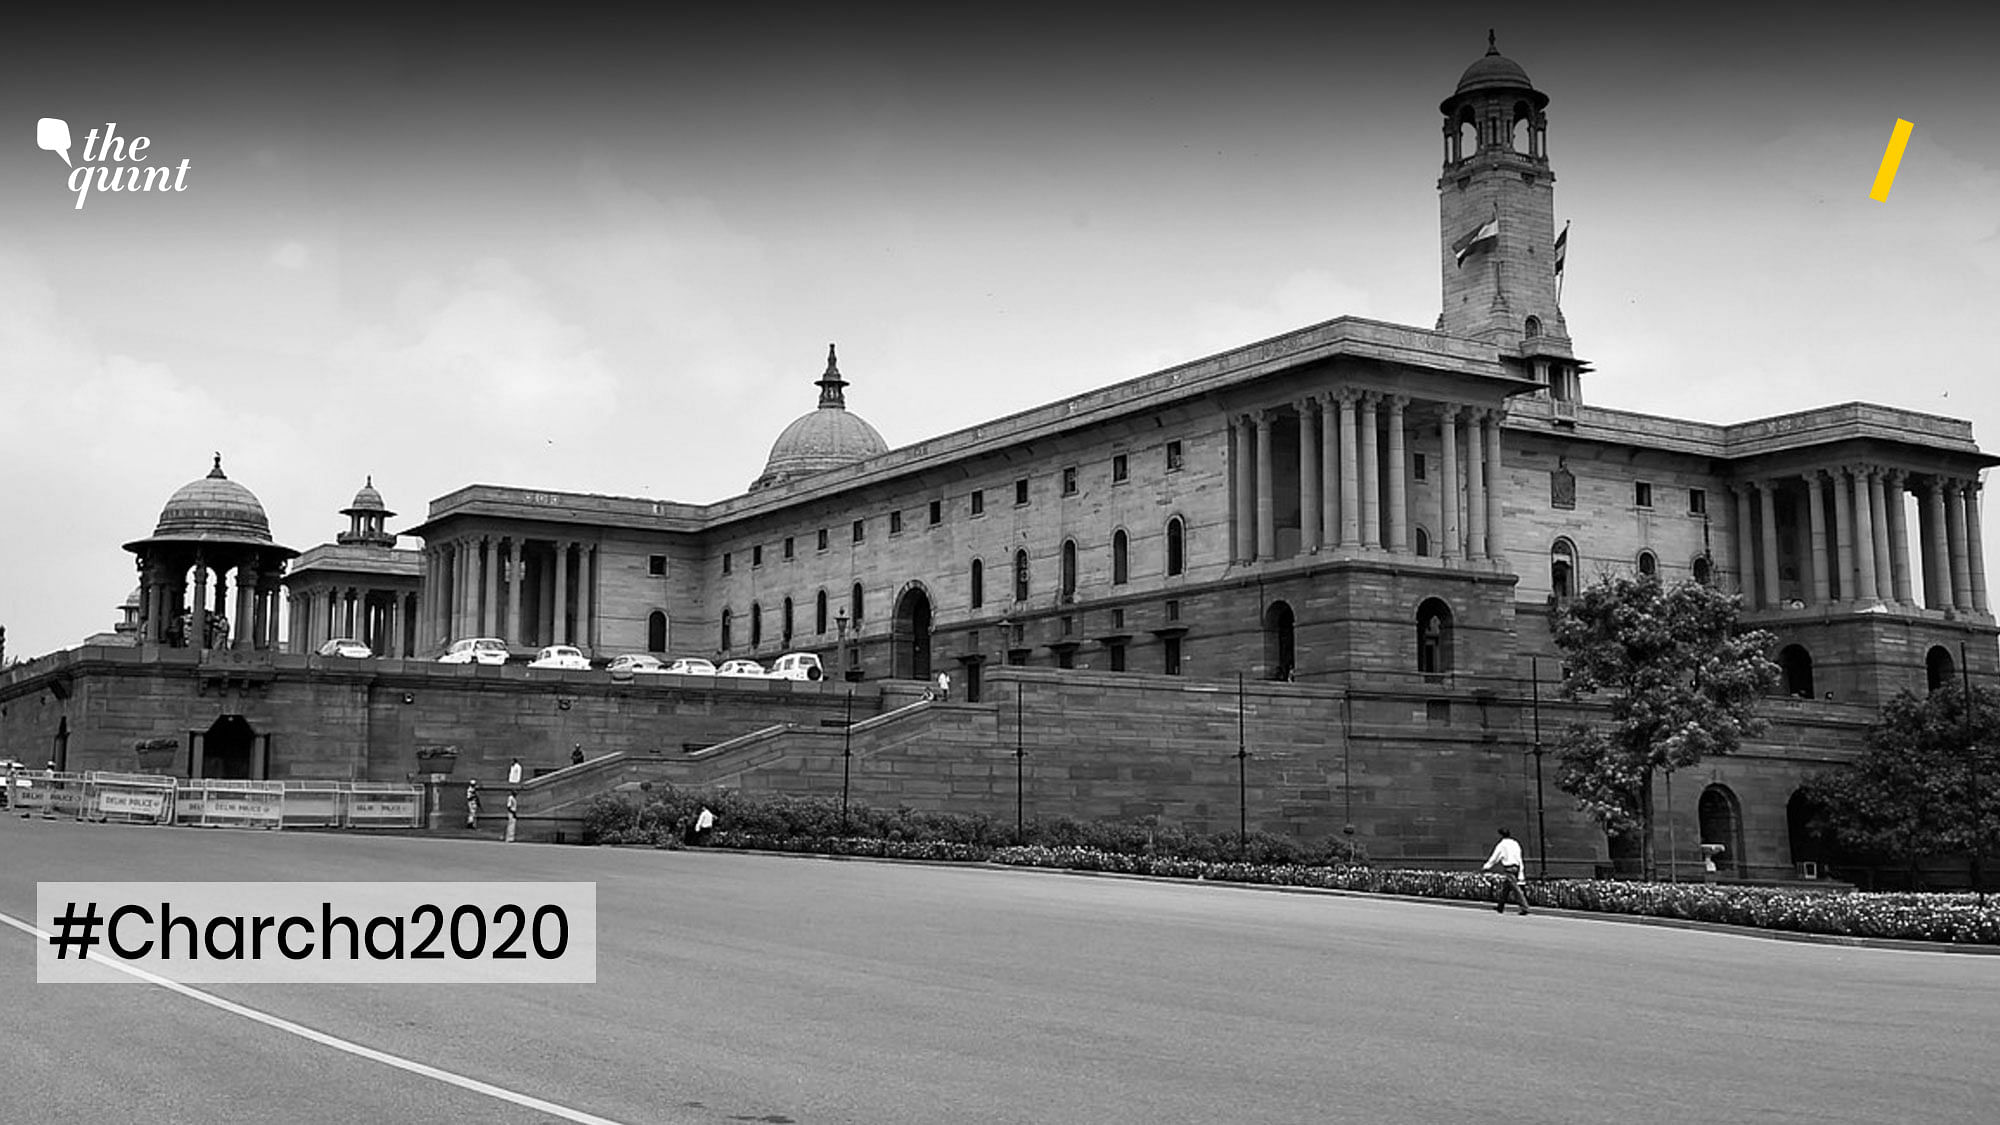 From May 14 to 16, 2020, ‘#charcha2020’ will host nine plenary sessions and 16 parallel events to cover the broad range of topics in the development sector.